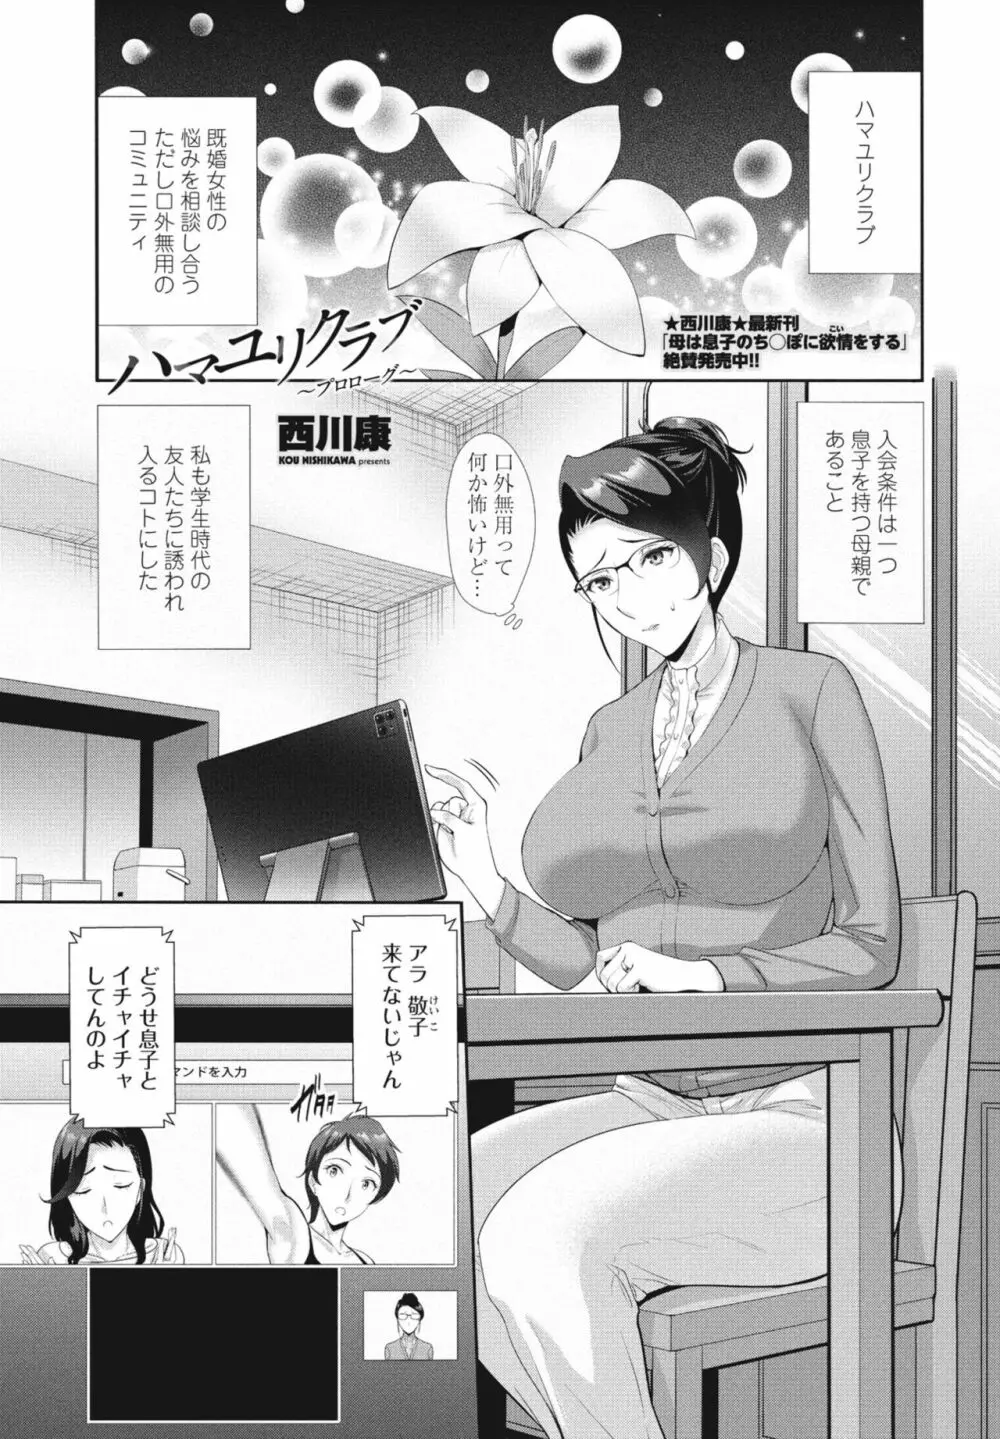 COMIC 桃姫DEEPEST Vol. 2 Page.65